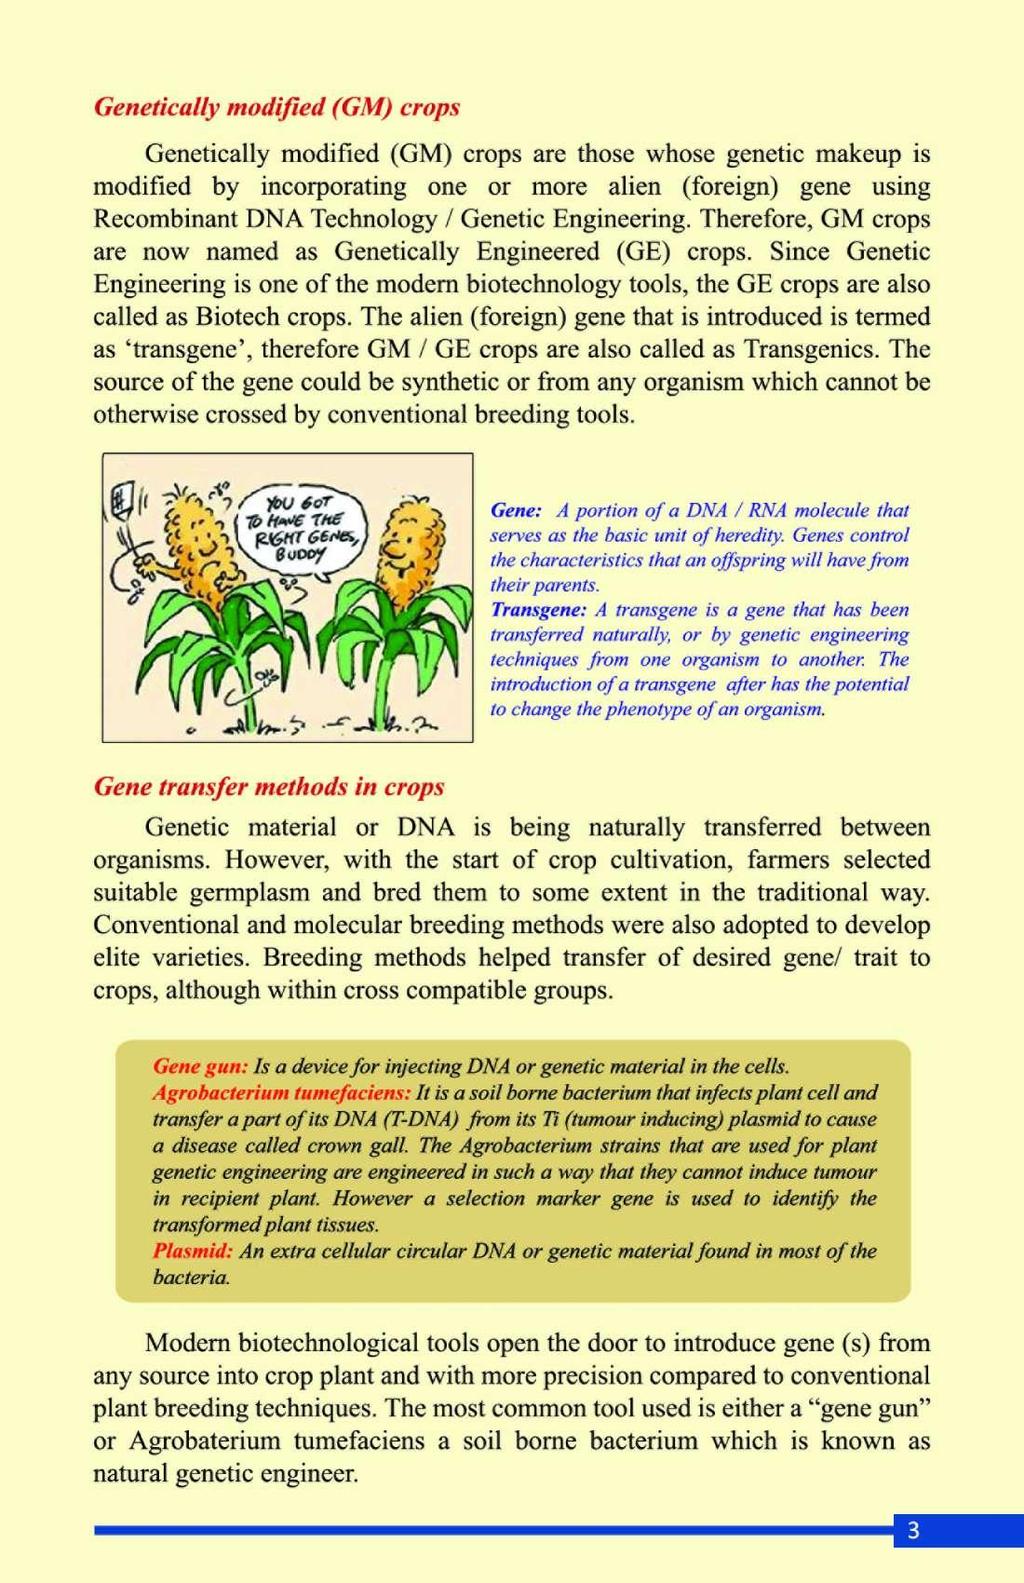 Genetically modified (GM) crops Genetically modified (GM) crops are those whose genetic makeup is modified by incorporating one or more alien (foreign) gene using Recombinant DNA Technology / Genetic